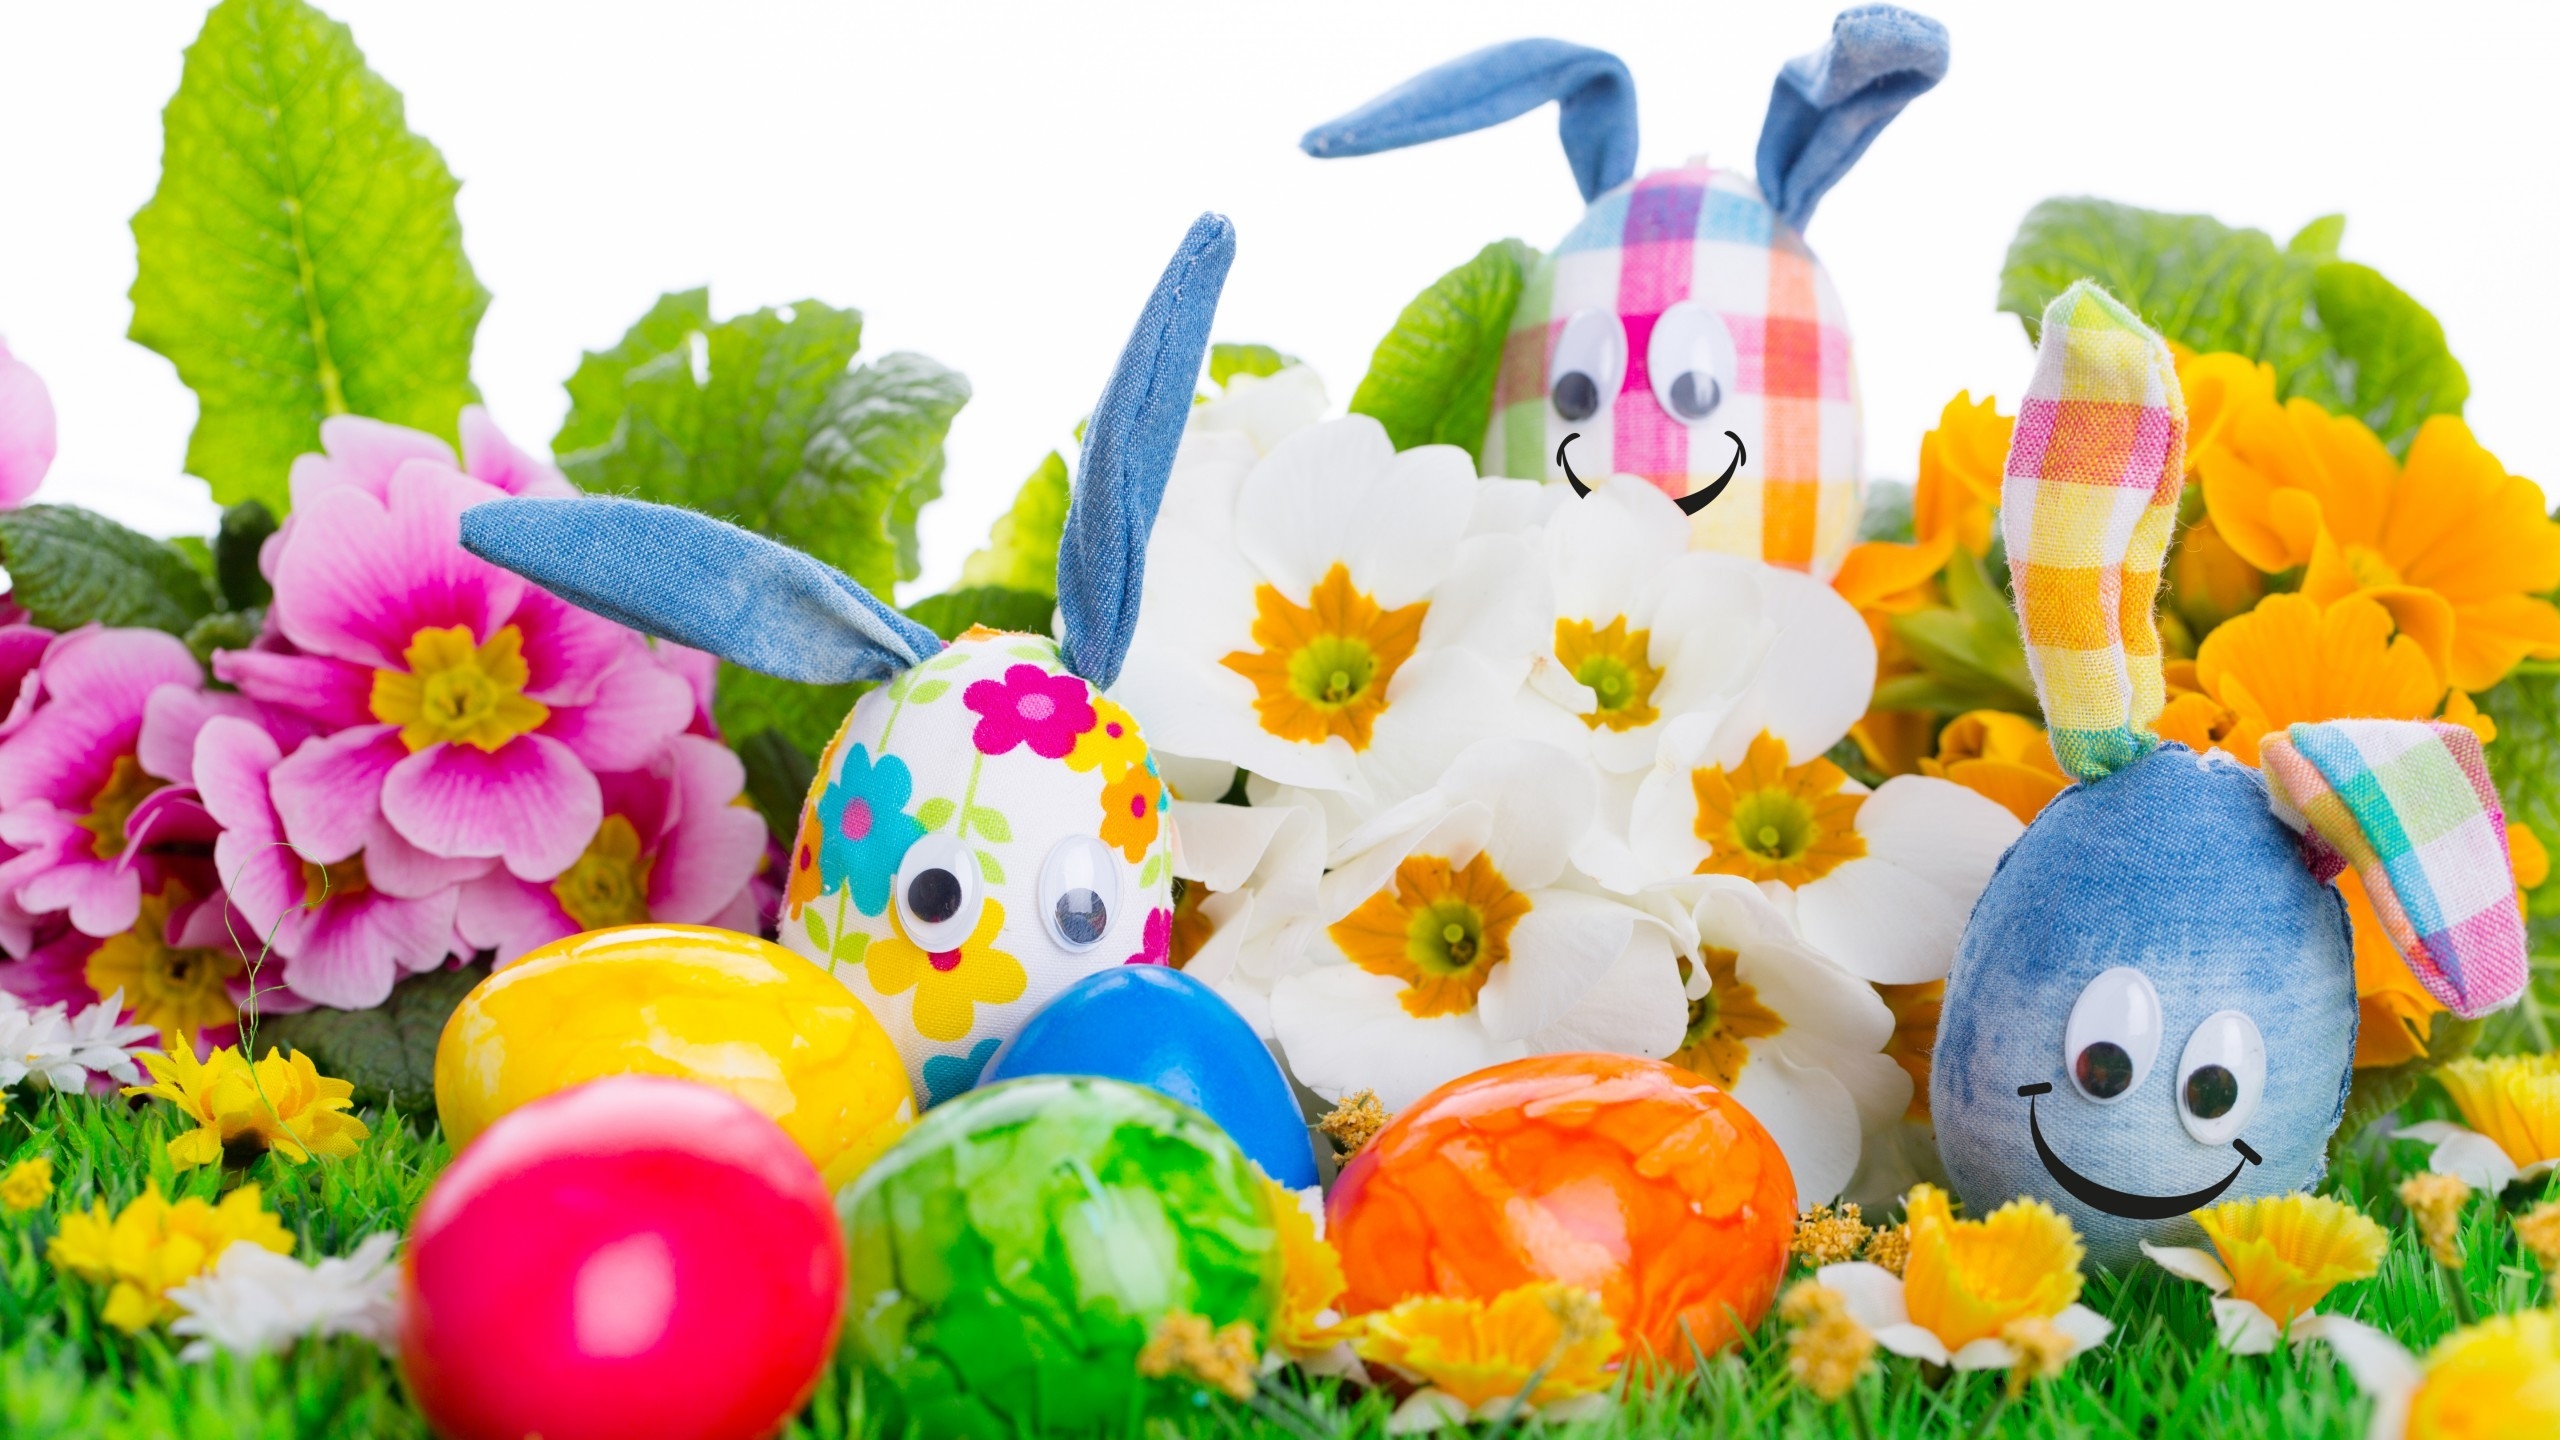 Handcrafted Easter Eggs for 2560x1440 HDTV resolution